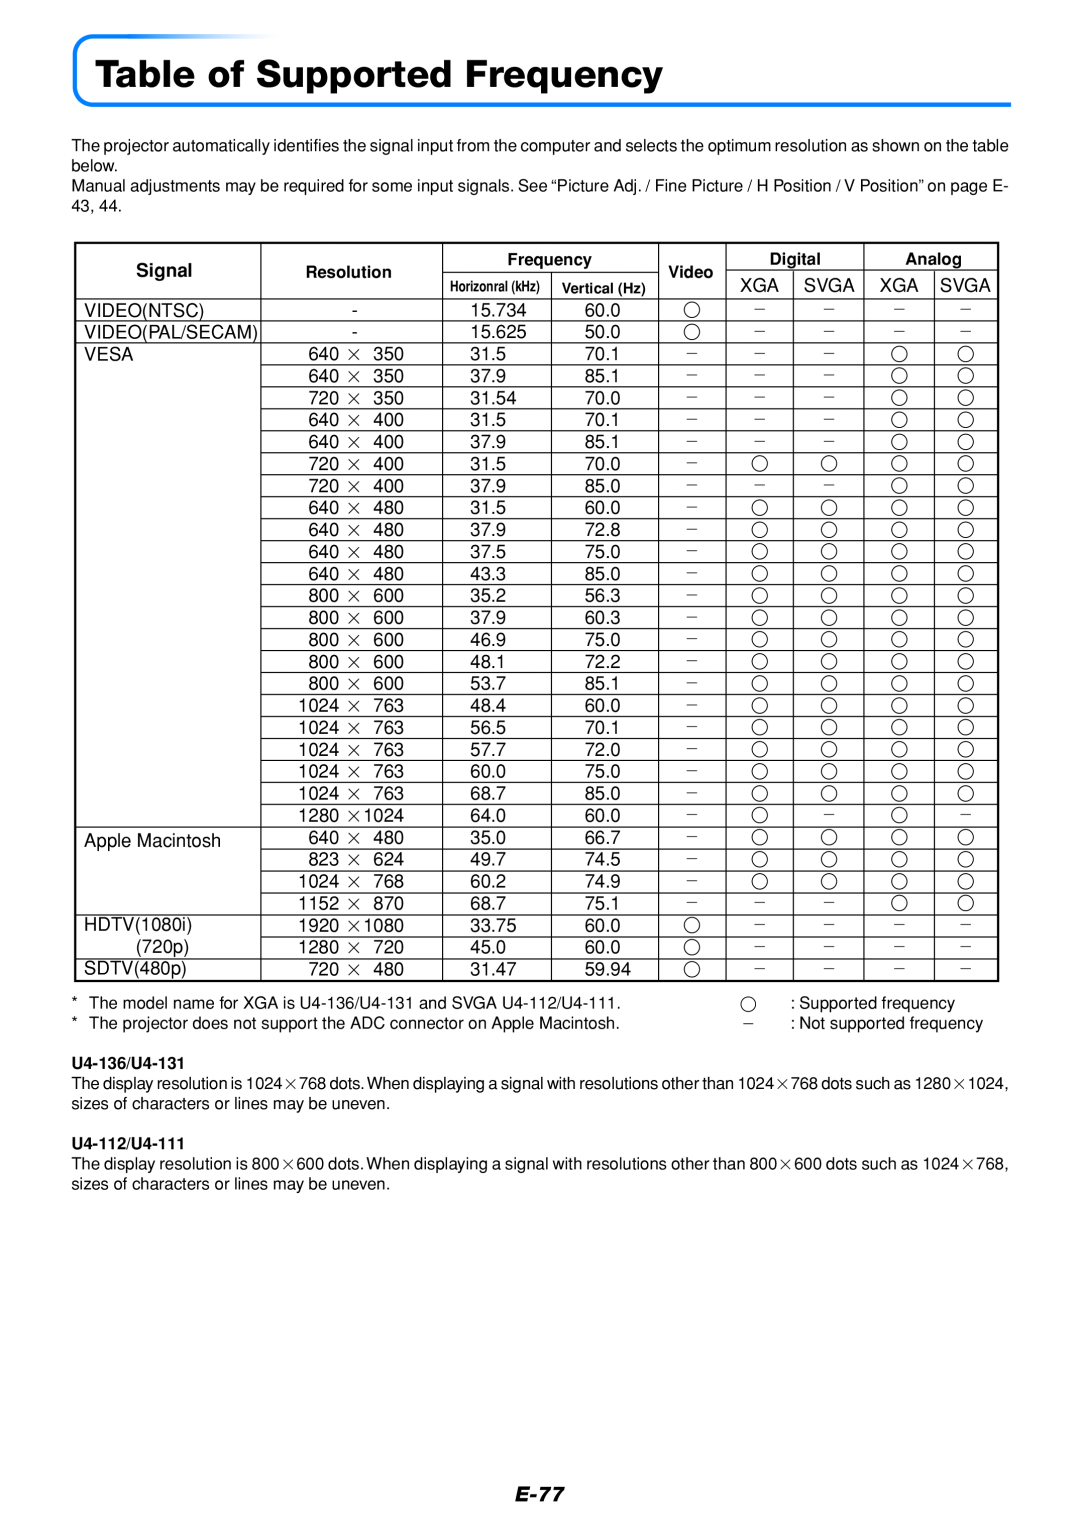 PLUS Vision U4-136, U4-111, U4-112 user manual Table of Supported Frequency, E-77, Signal 